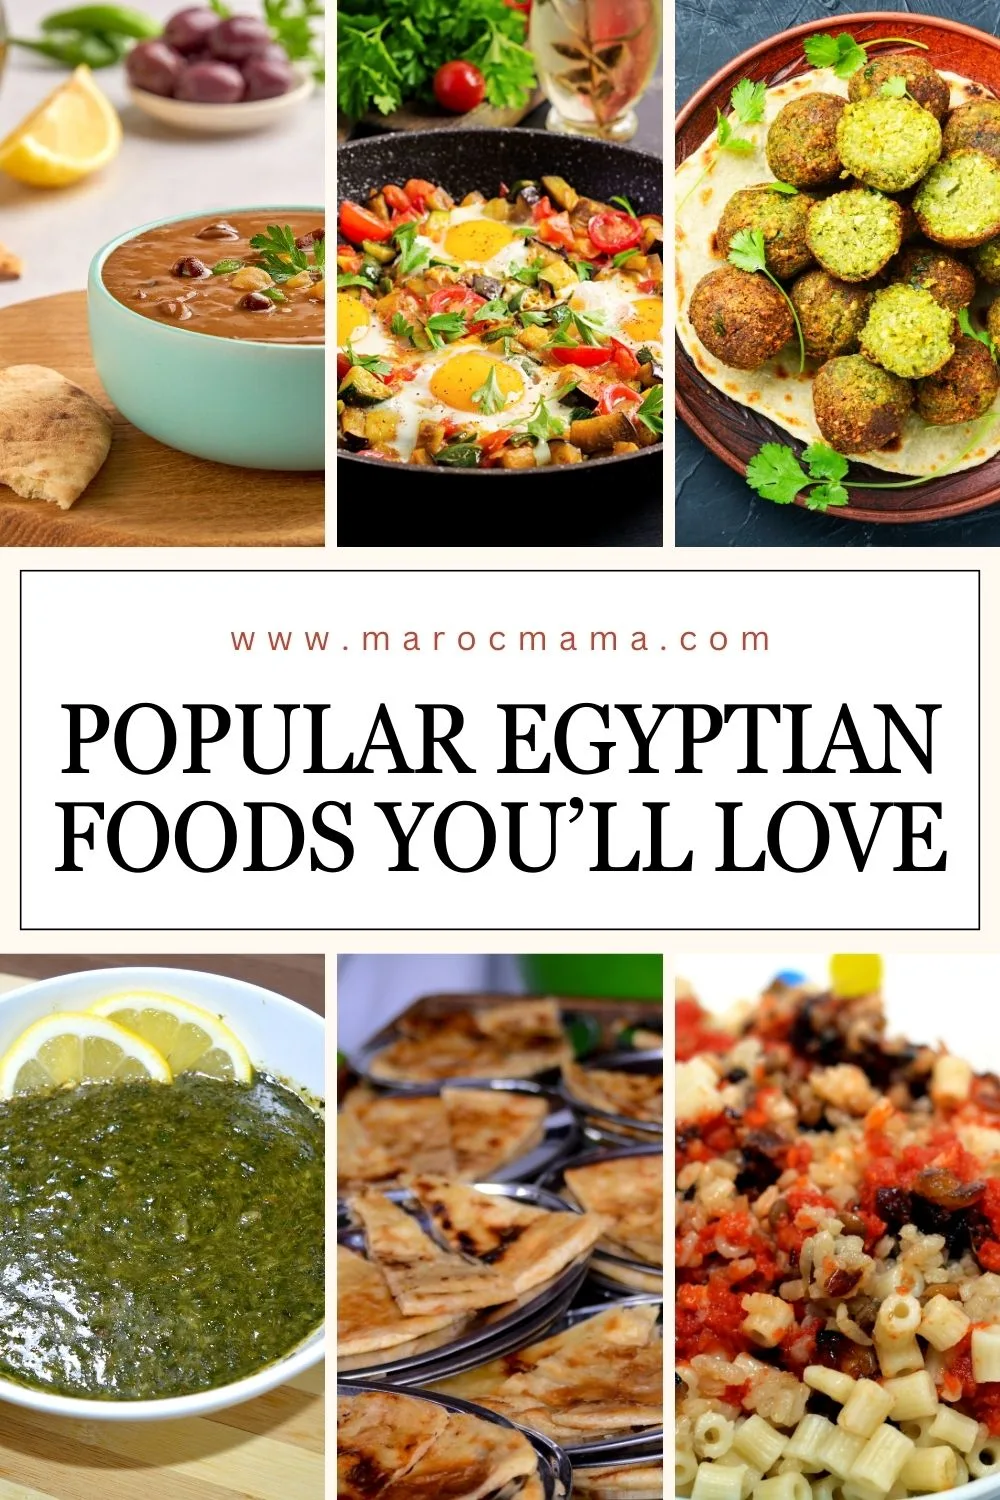 Egyptian Foods with the text Popular Egyptian Foods You’ll Love